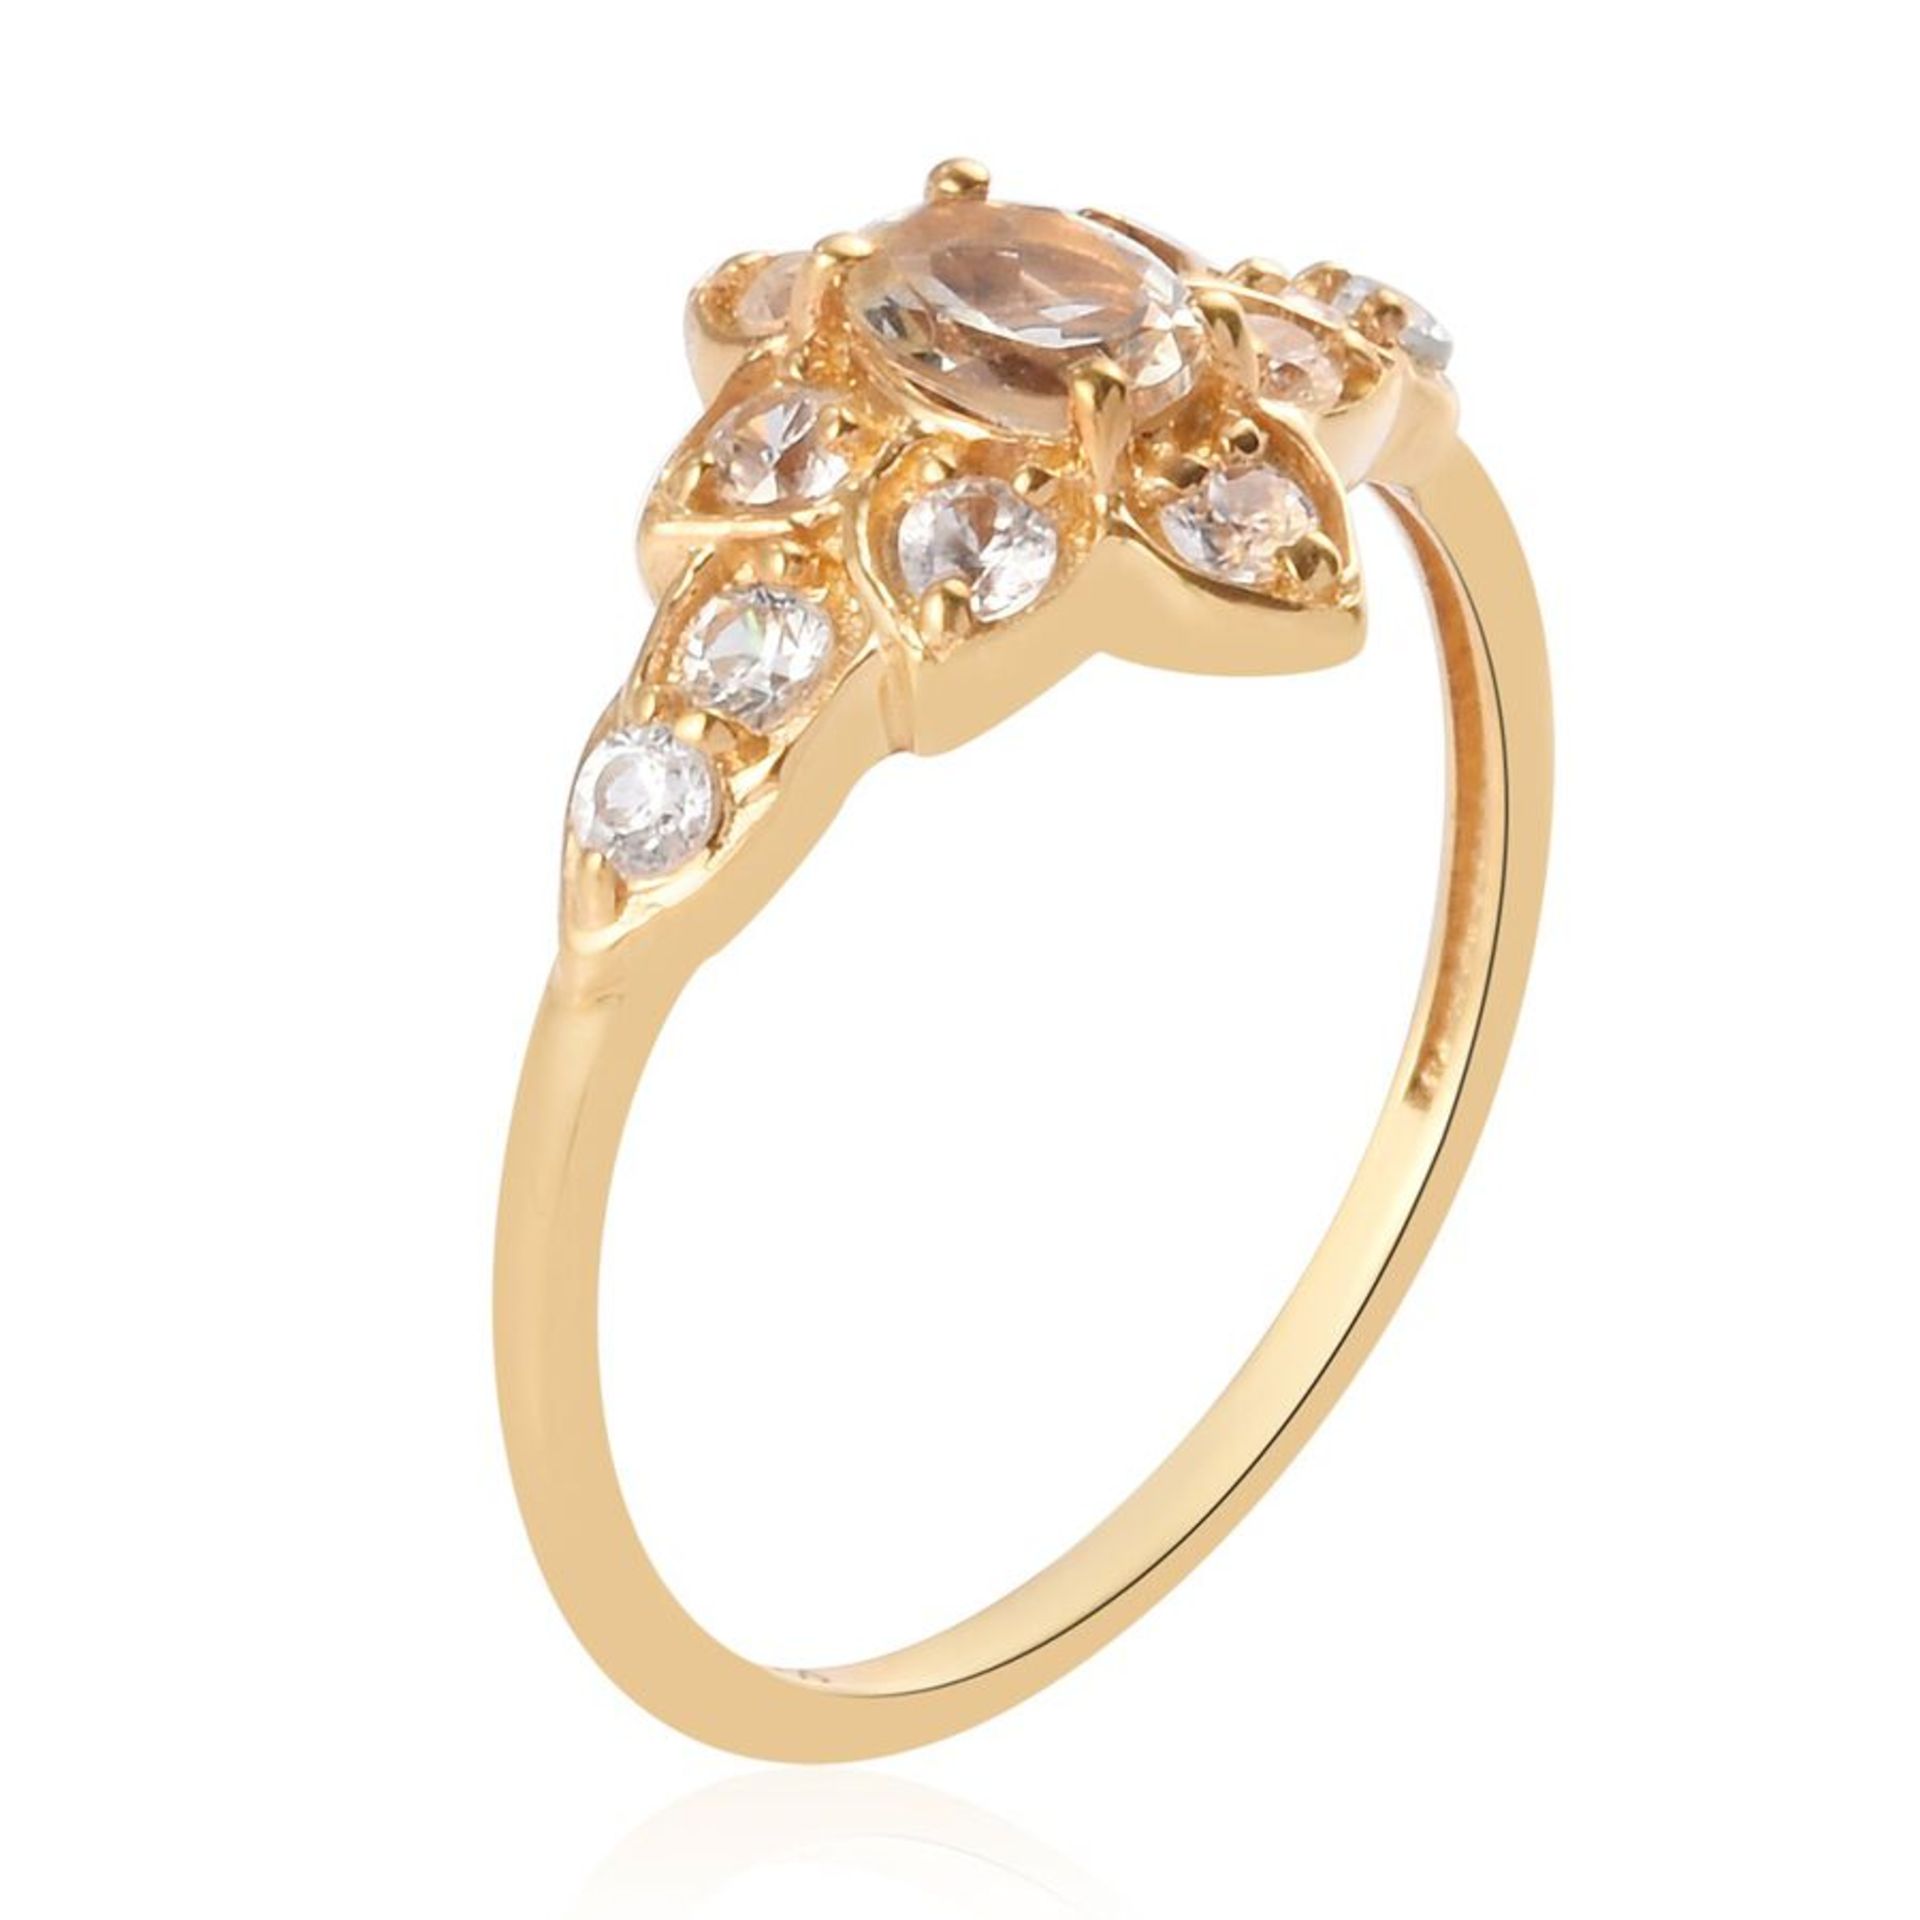 NEW!! Golden Precious Topaz and Natural Cambodian Zircon Ring - Image 3 of 4